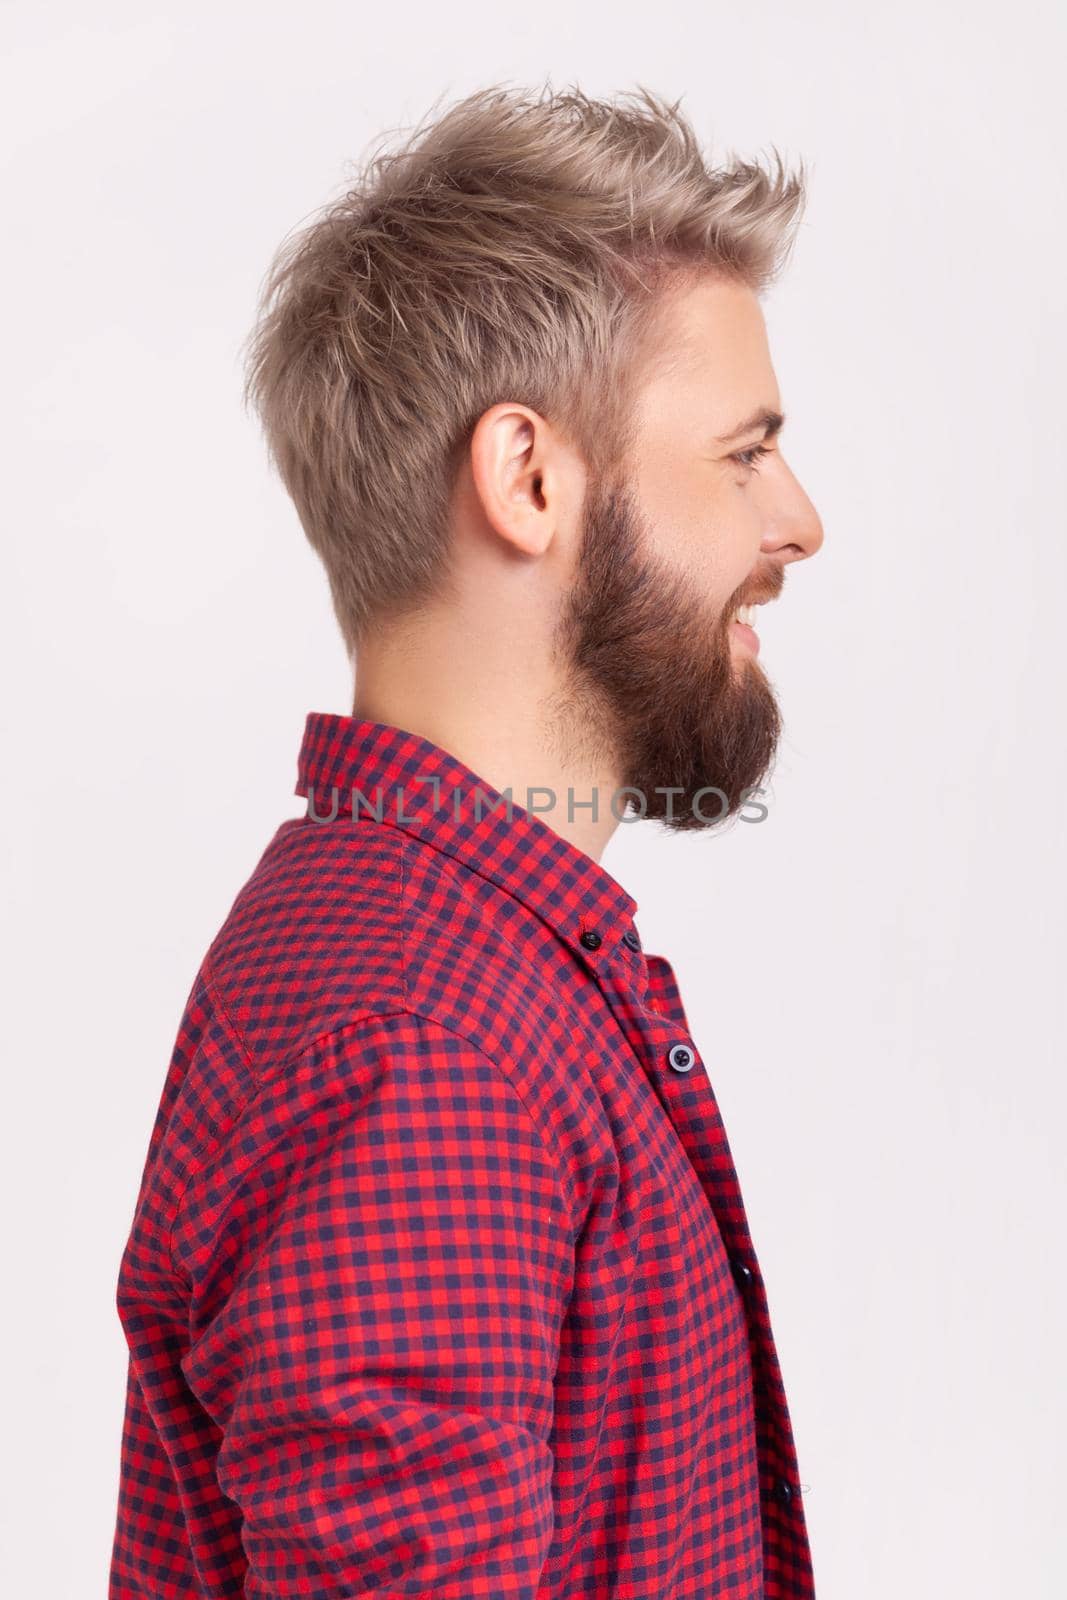 Profile portrait of happy bearded millennial man in red t-shirt sincerely smiling and looking to side, positive mood and optimistic lifestyle by Khosro1